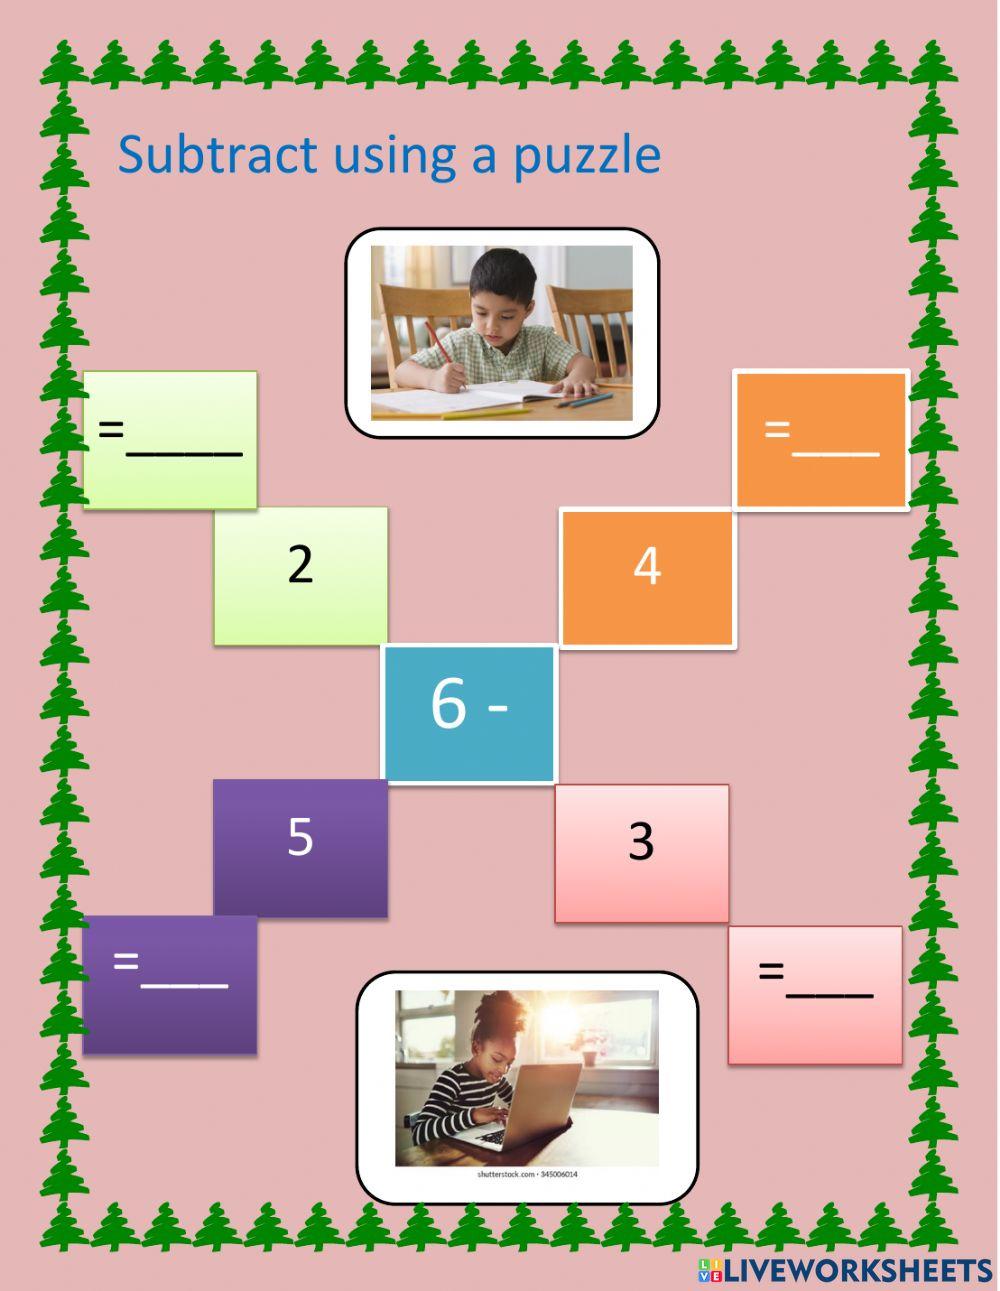 Subtract using a puzzle